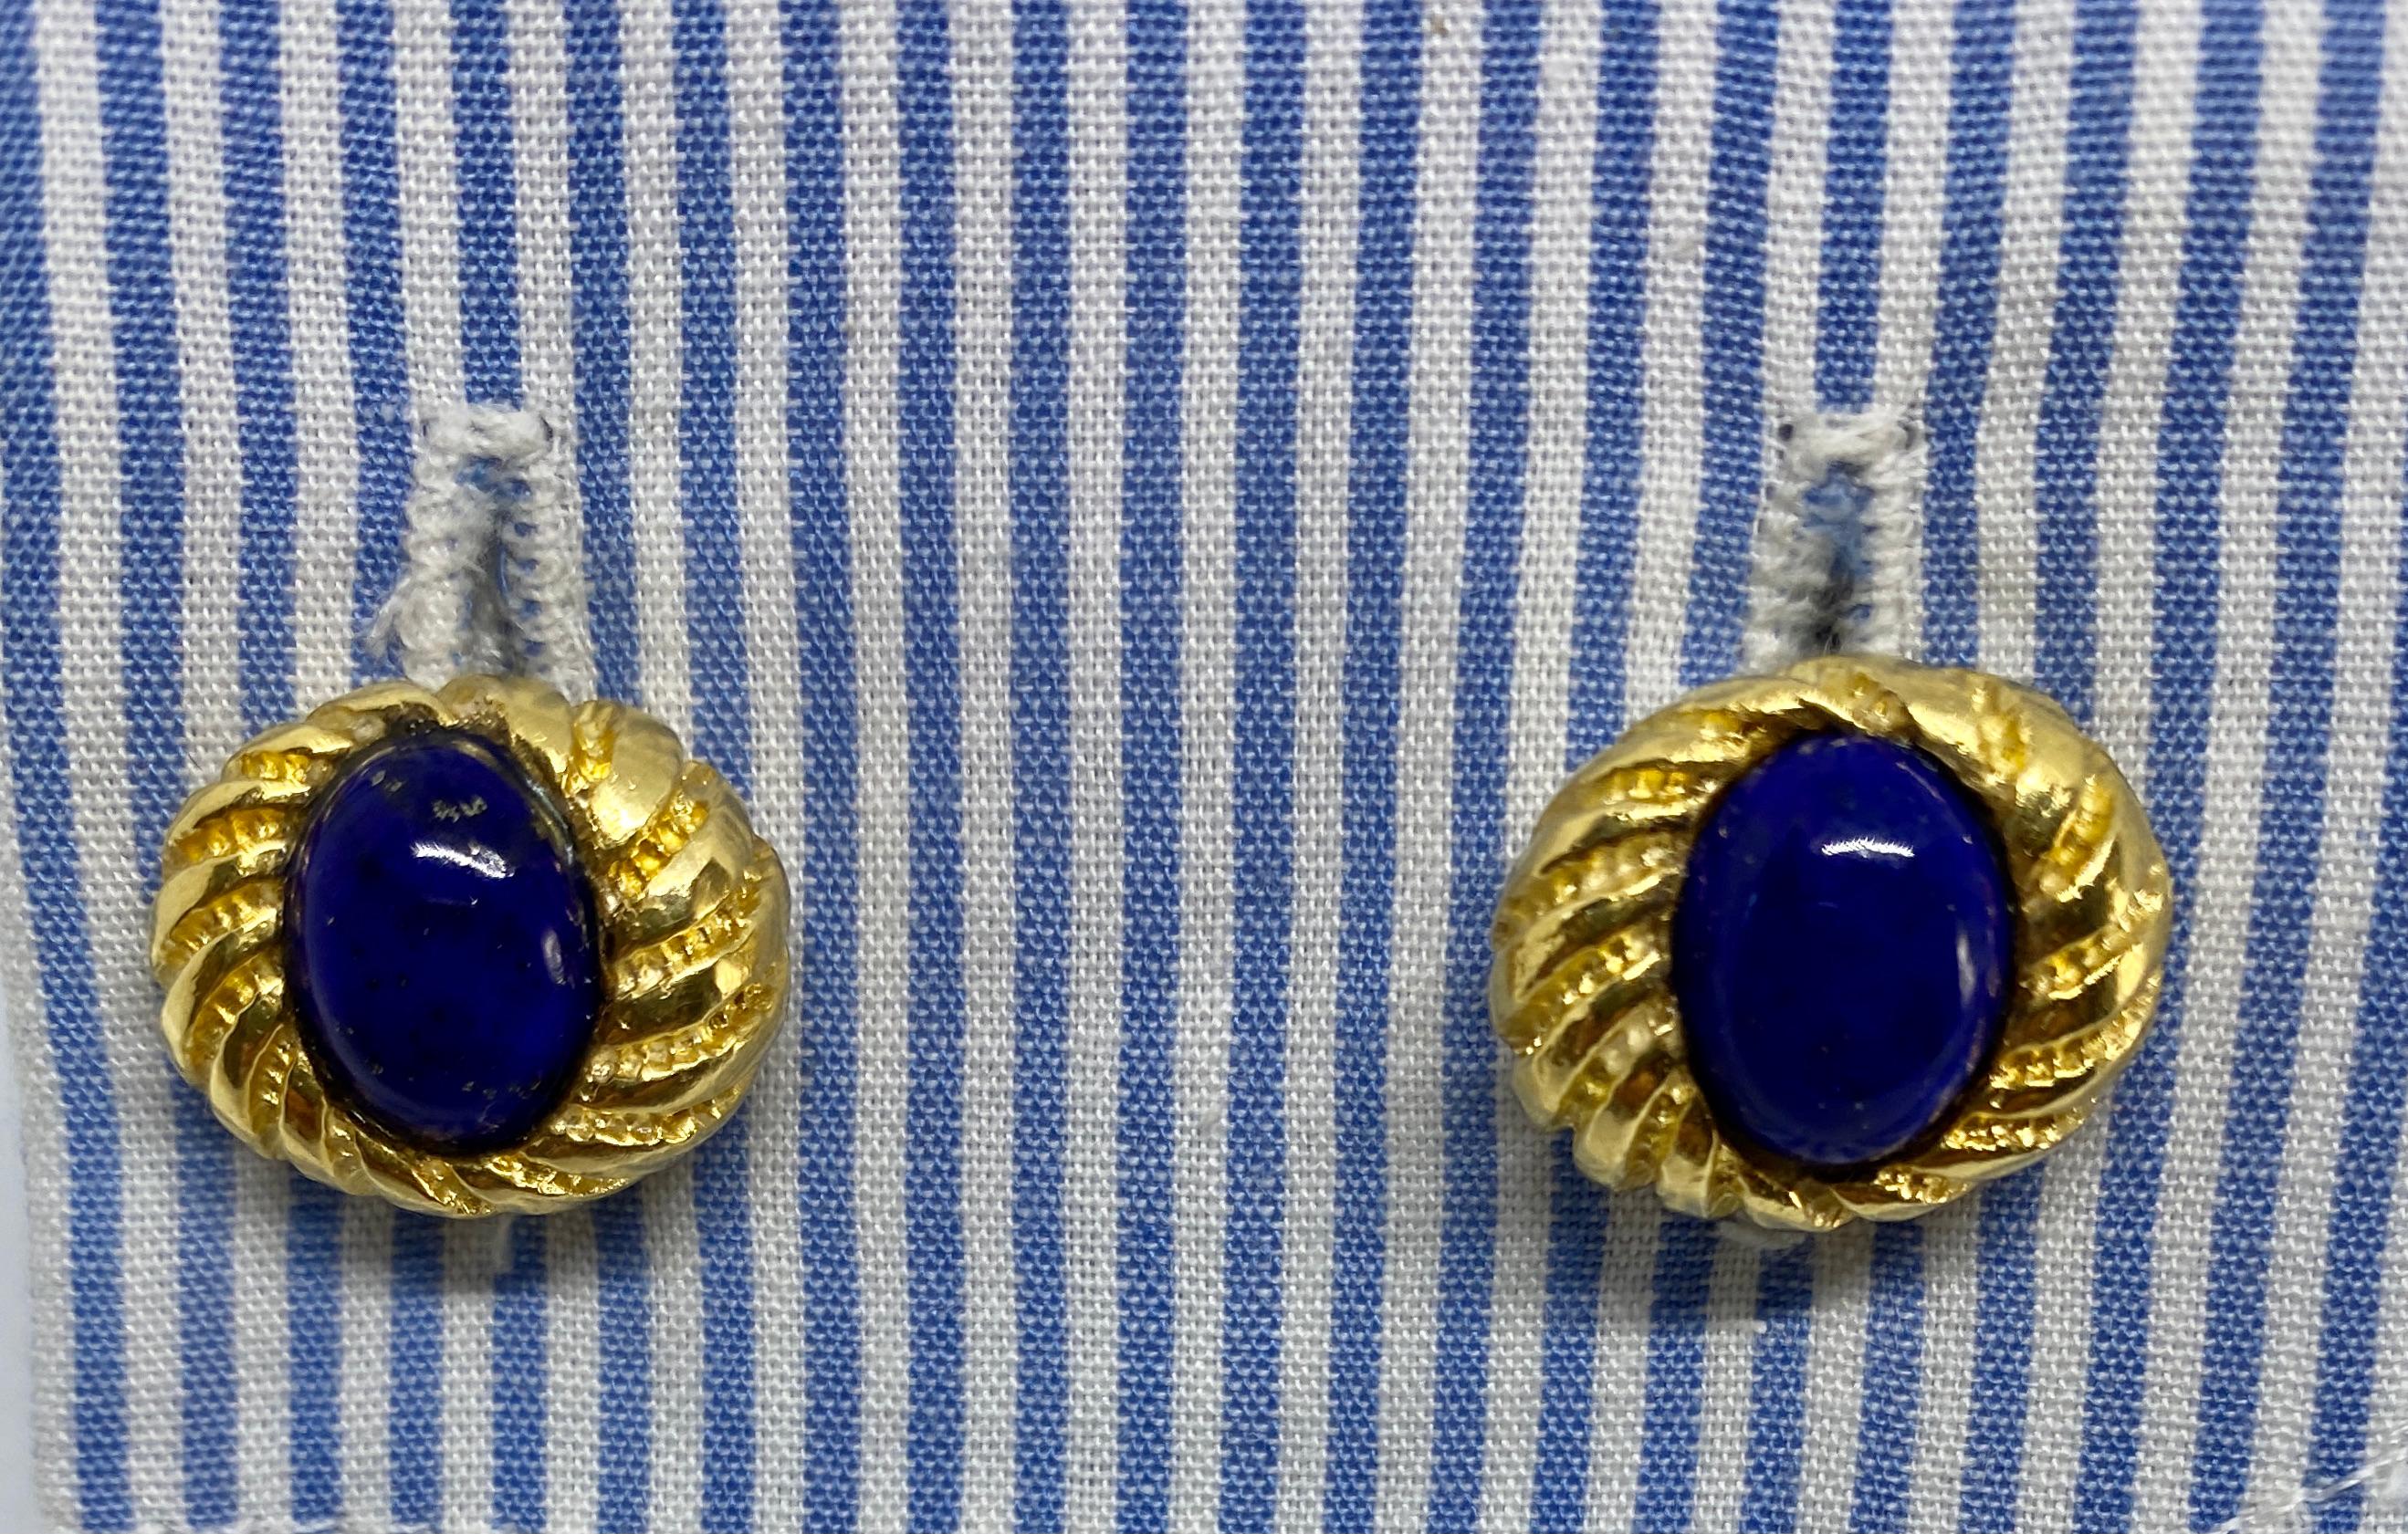 Vintage 18k Yellow Gold and Lapis Cufflinks In Fair Condition For Sale In San Rafael, CA